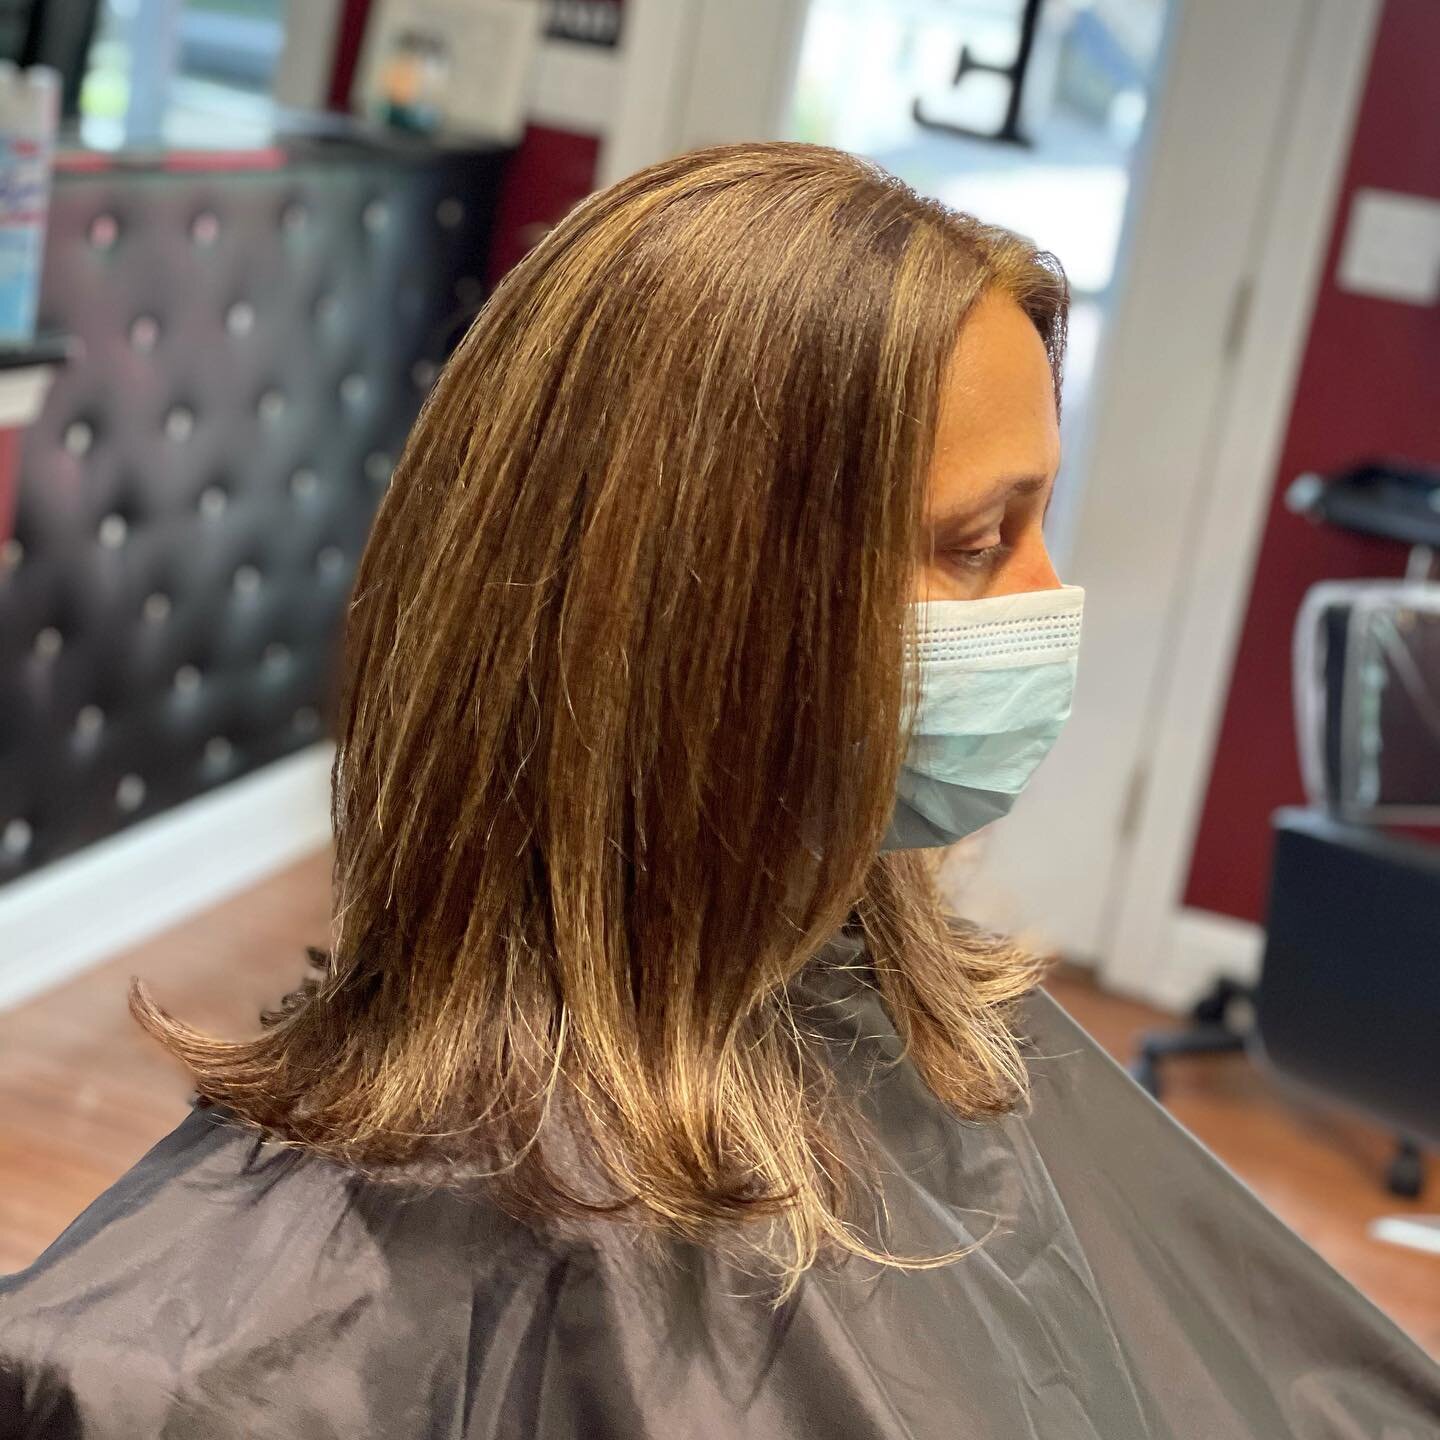 We&rsquo;re at it again! Have you scheduled your next appointment? 💇🏼&zwj;♀️
.
Hairstylist: Lucy
.
.
.
.
#lexsalon #phoenixvillehair #phoenixvillepa #phoenixvillehairstylist #pville #pvillehair #pottstown #pottstownhairstylist #hairtips #hairtips10